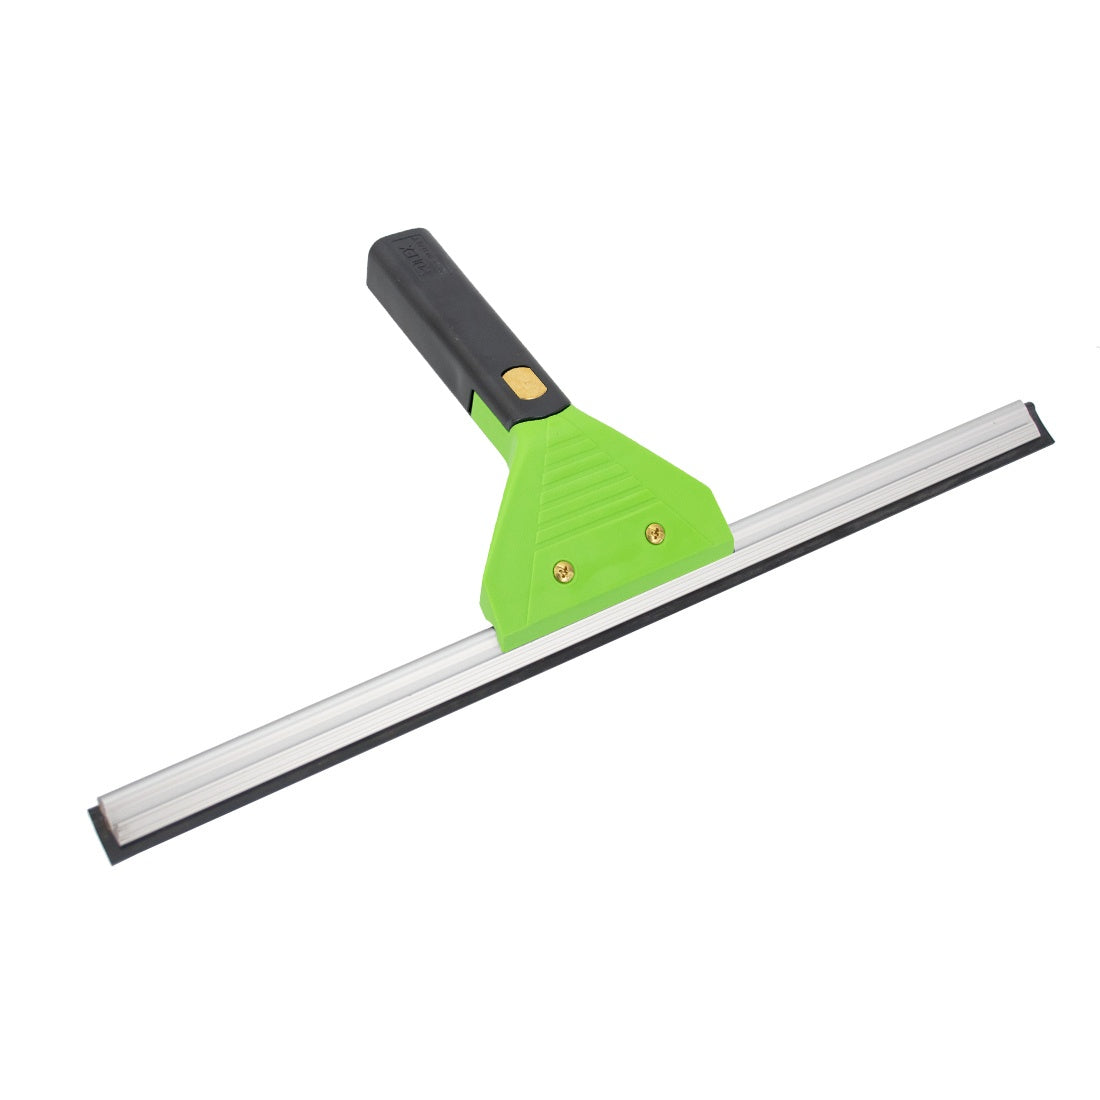 Swivel Squeegee + 18' Extension Pole